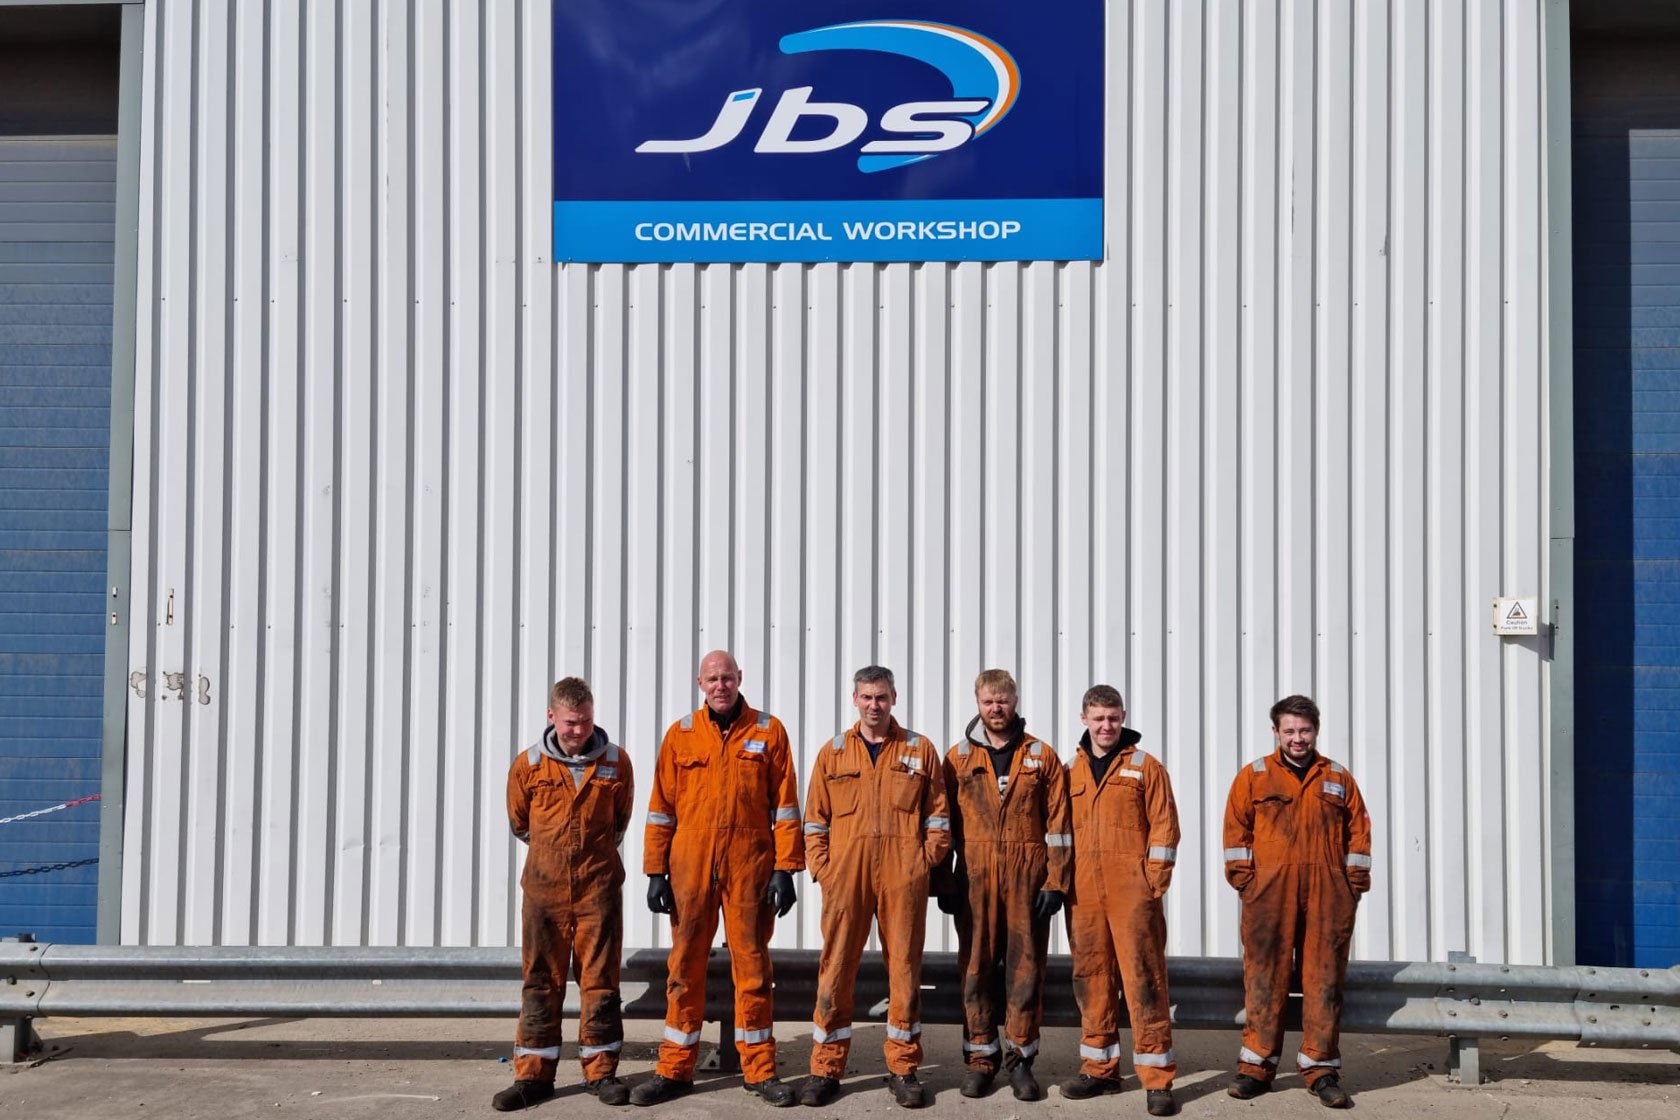 Technician Team lined up in orange jumpsuits in front of the JBS workshop